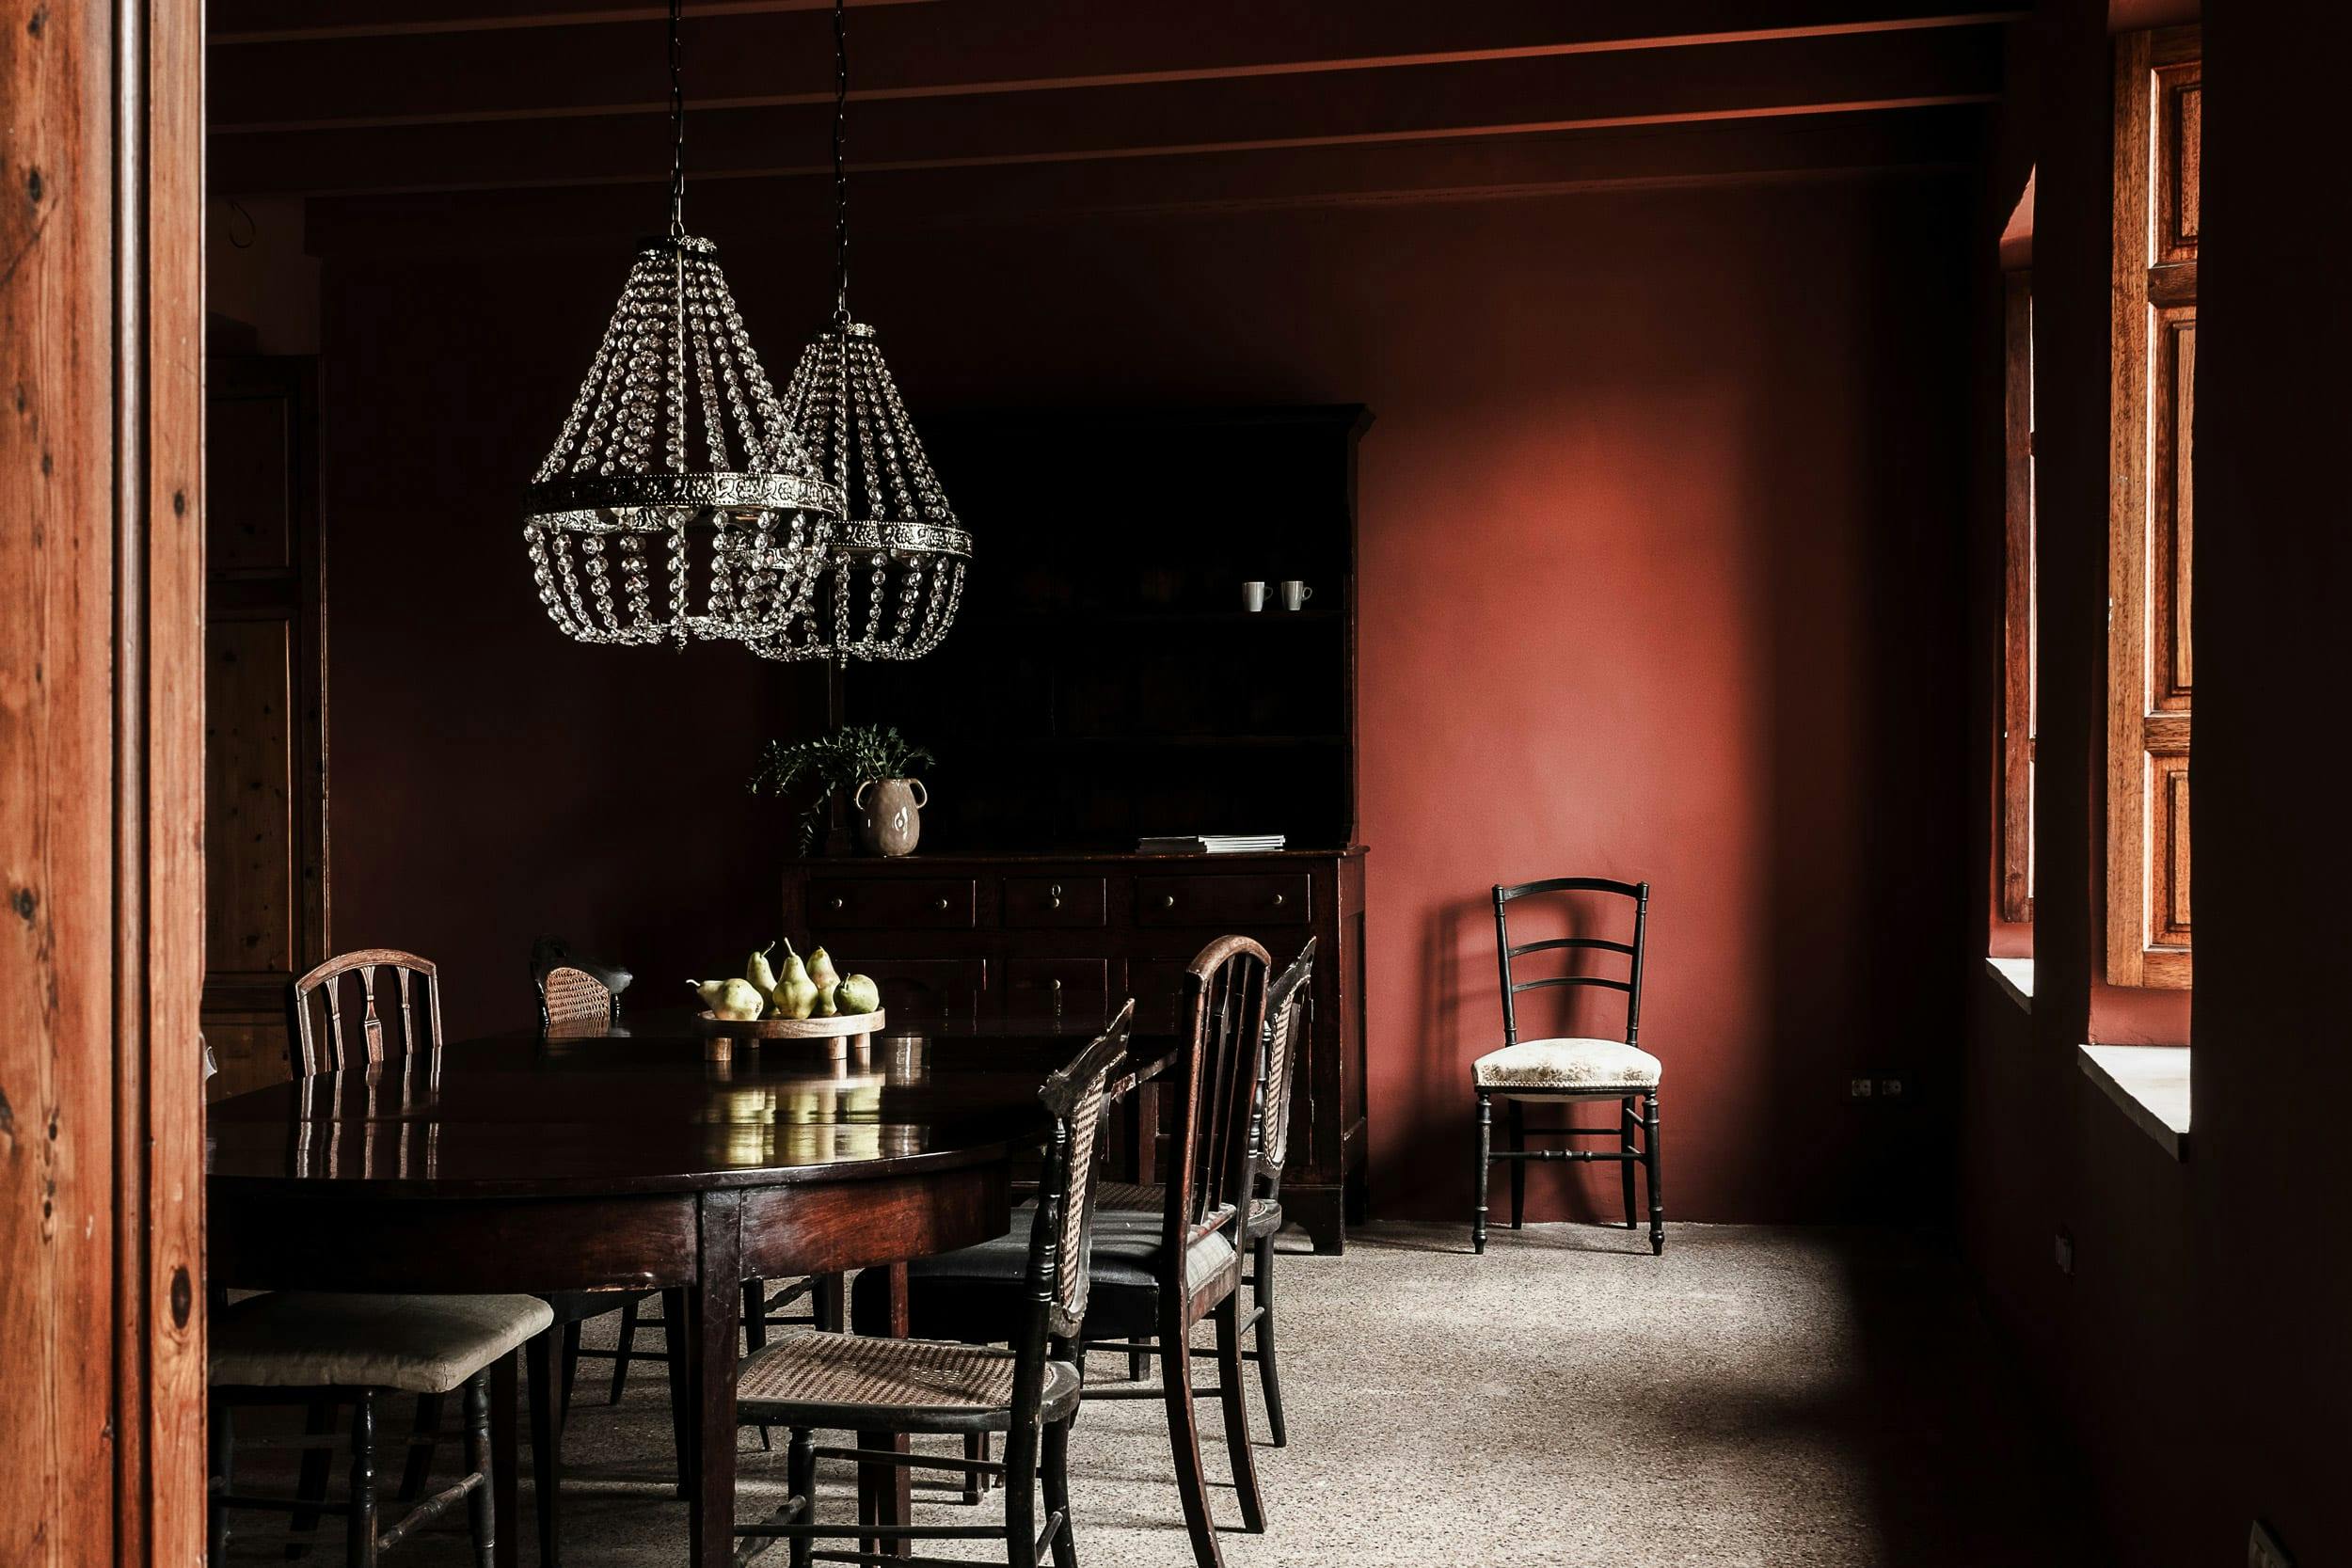 The image features a dark room with a long hallway, a dining table with chairs, and a chandelier hanging from the ceiling.